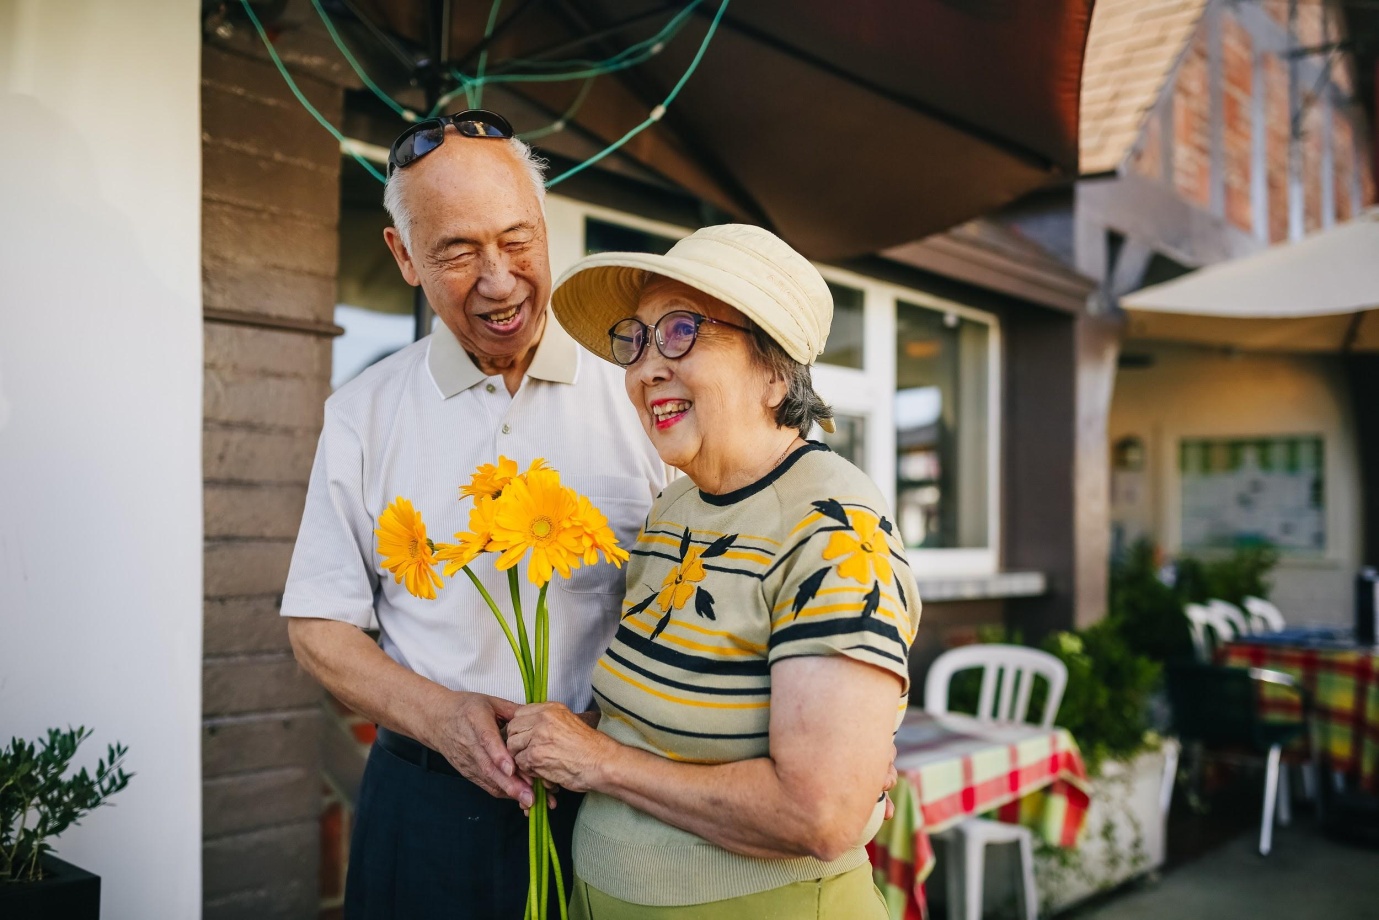 Dating A Widower: 4 Important Facts You Need to Know